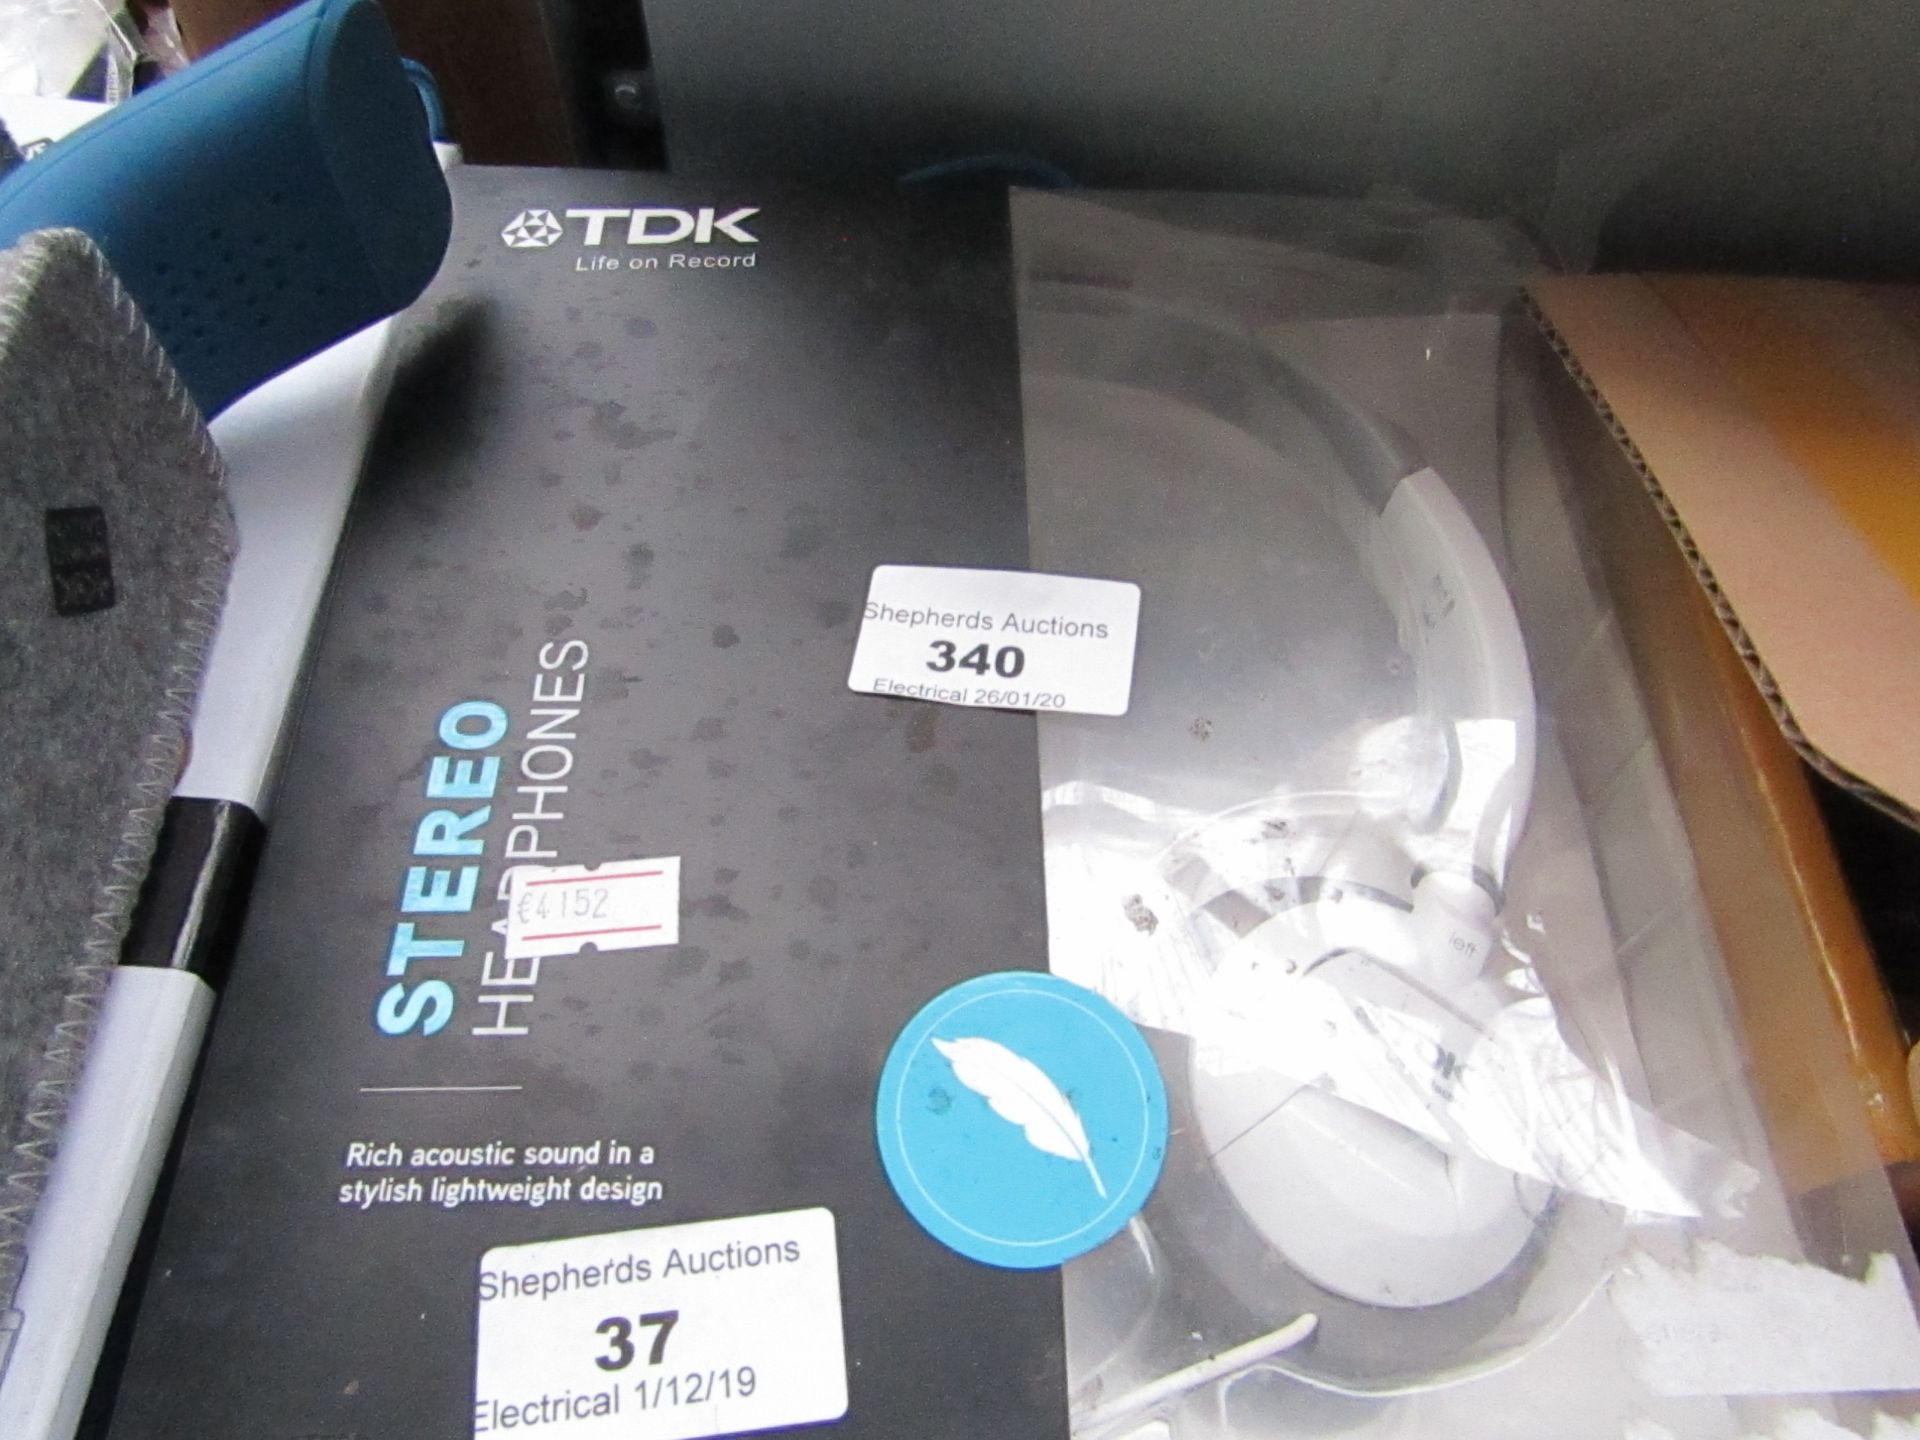 TDK - Stereo Headphones - ST100 - Untested and packaged.